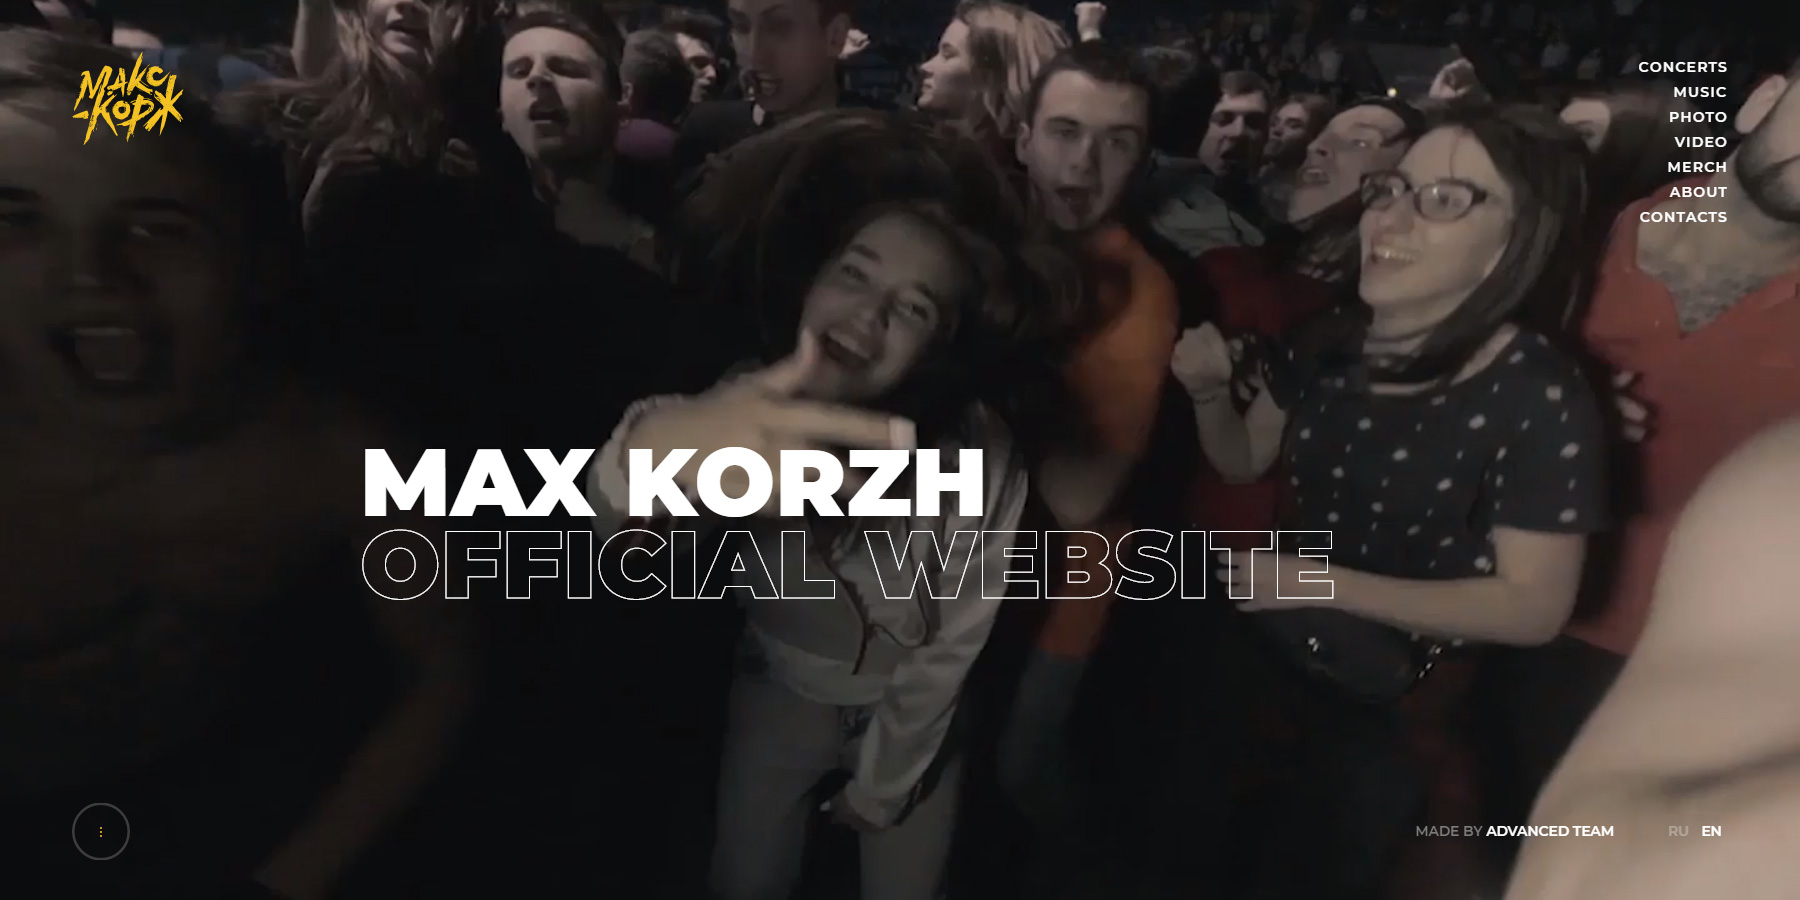 Max Korzh - Official website - Website of the Day